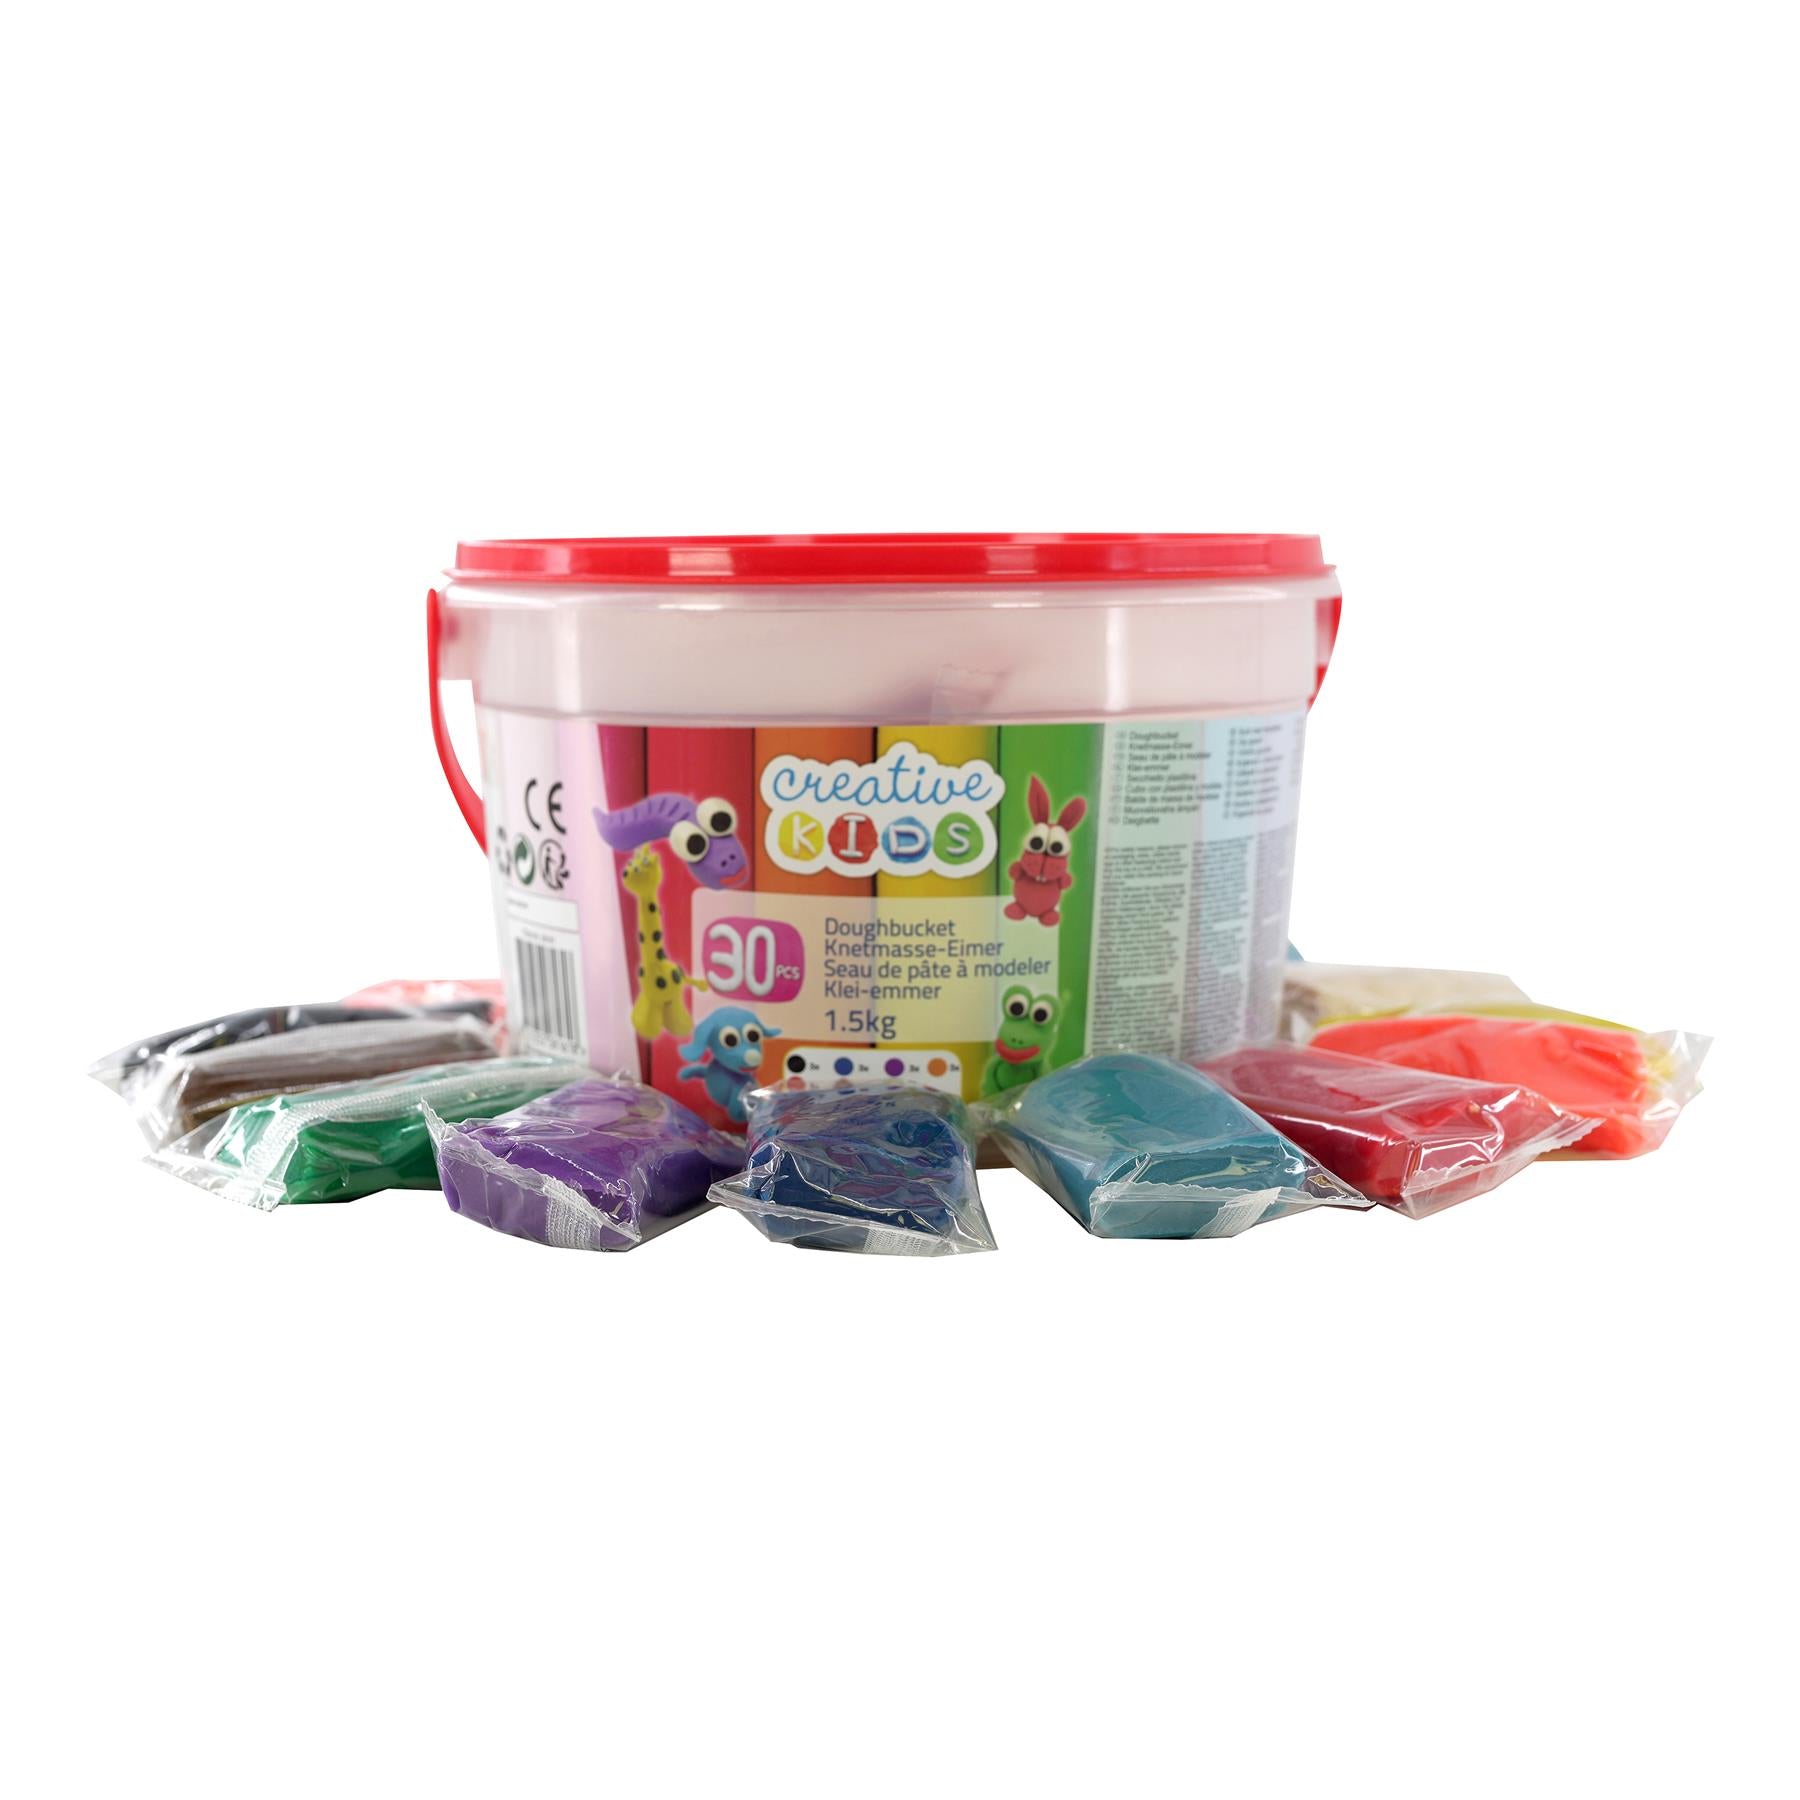 1.5 Kg Giant Play Dough Set in Bucket by The Magic Toy Shop - UKBuyZone